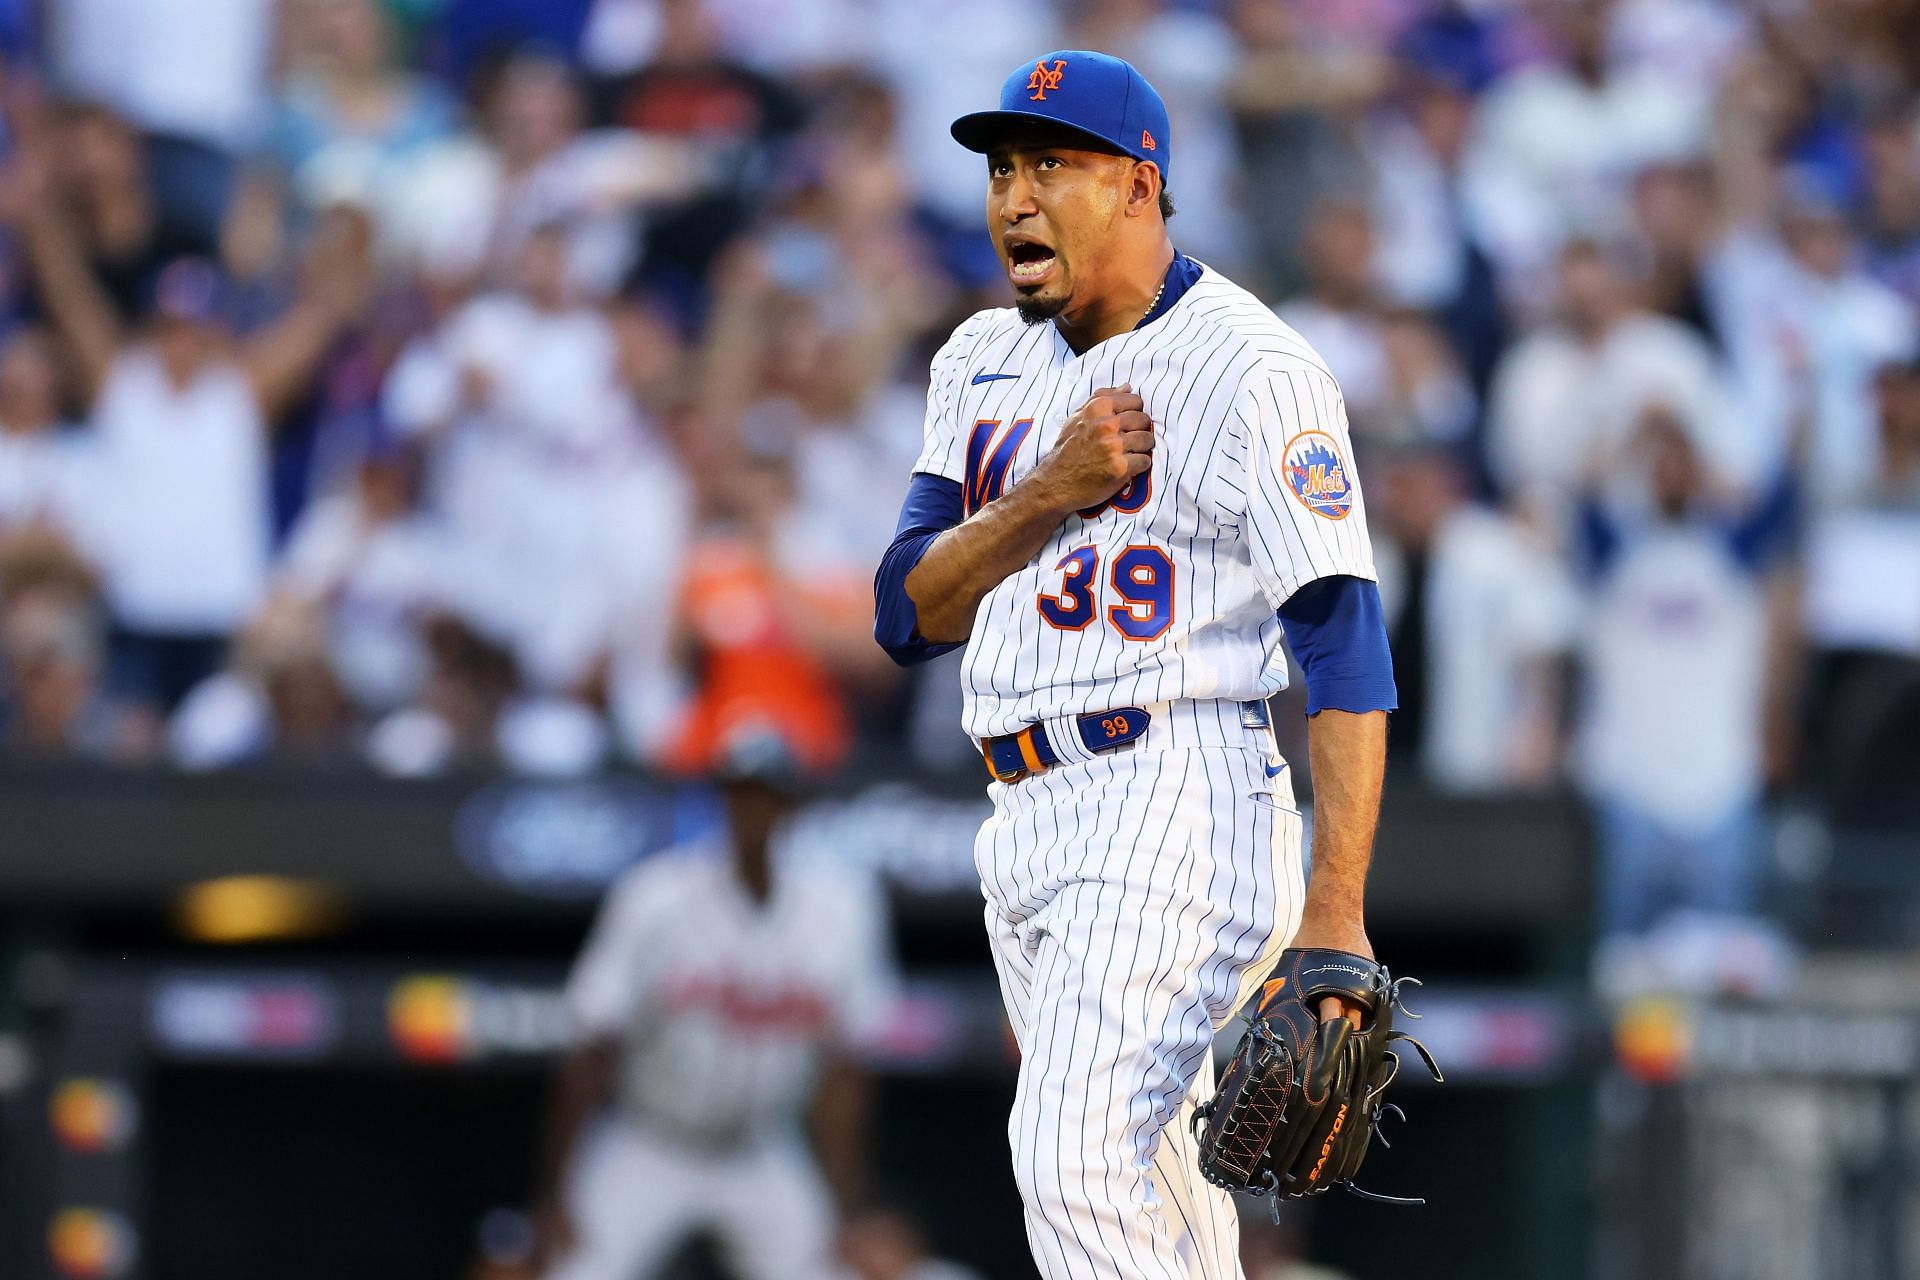 Timmy Trump Could Play Edwin Diaz's Entrance Music Live at Citi